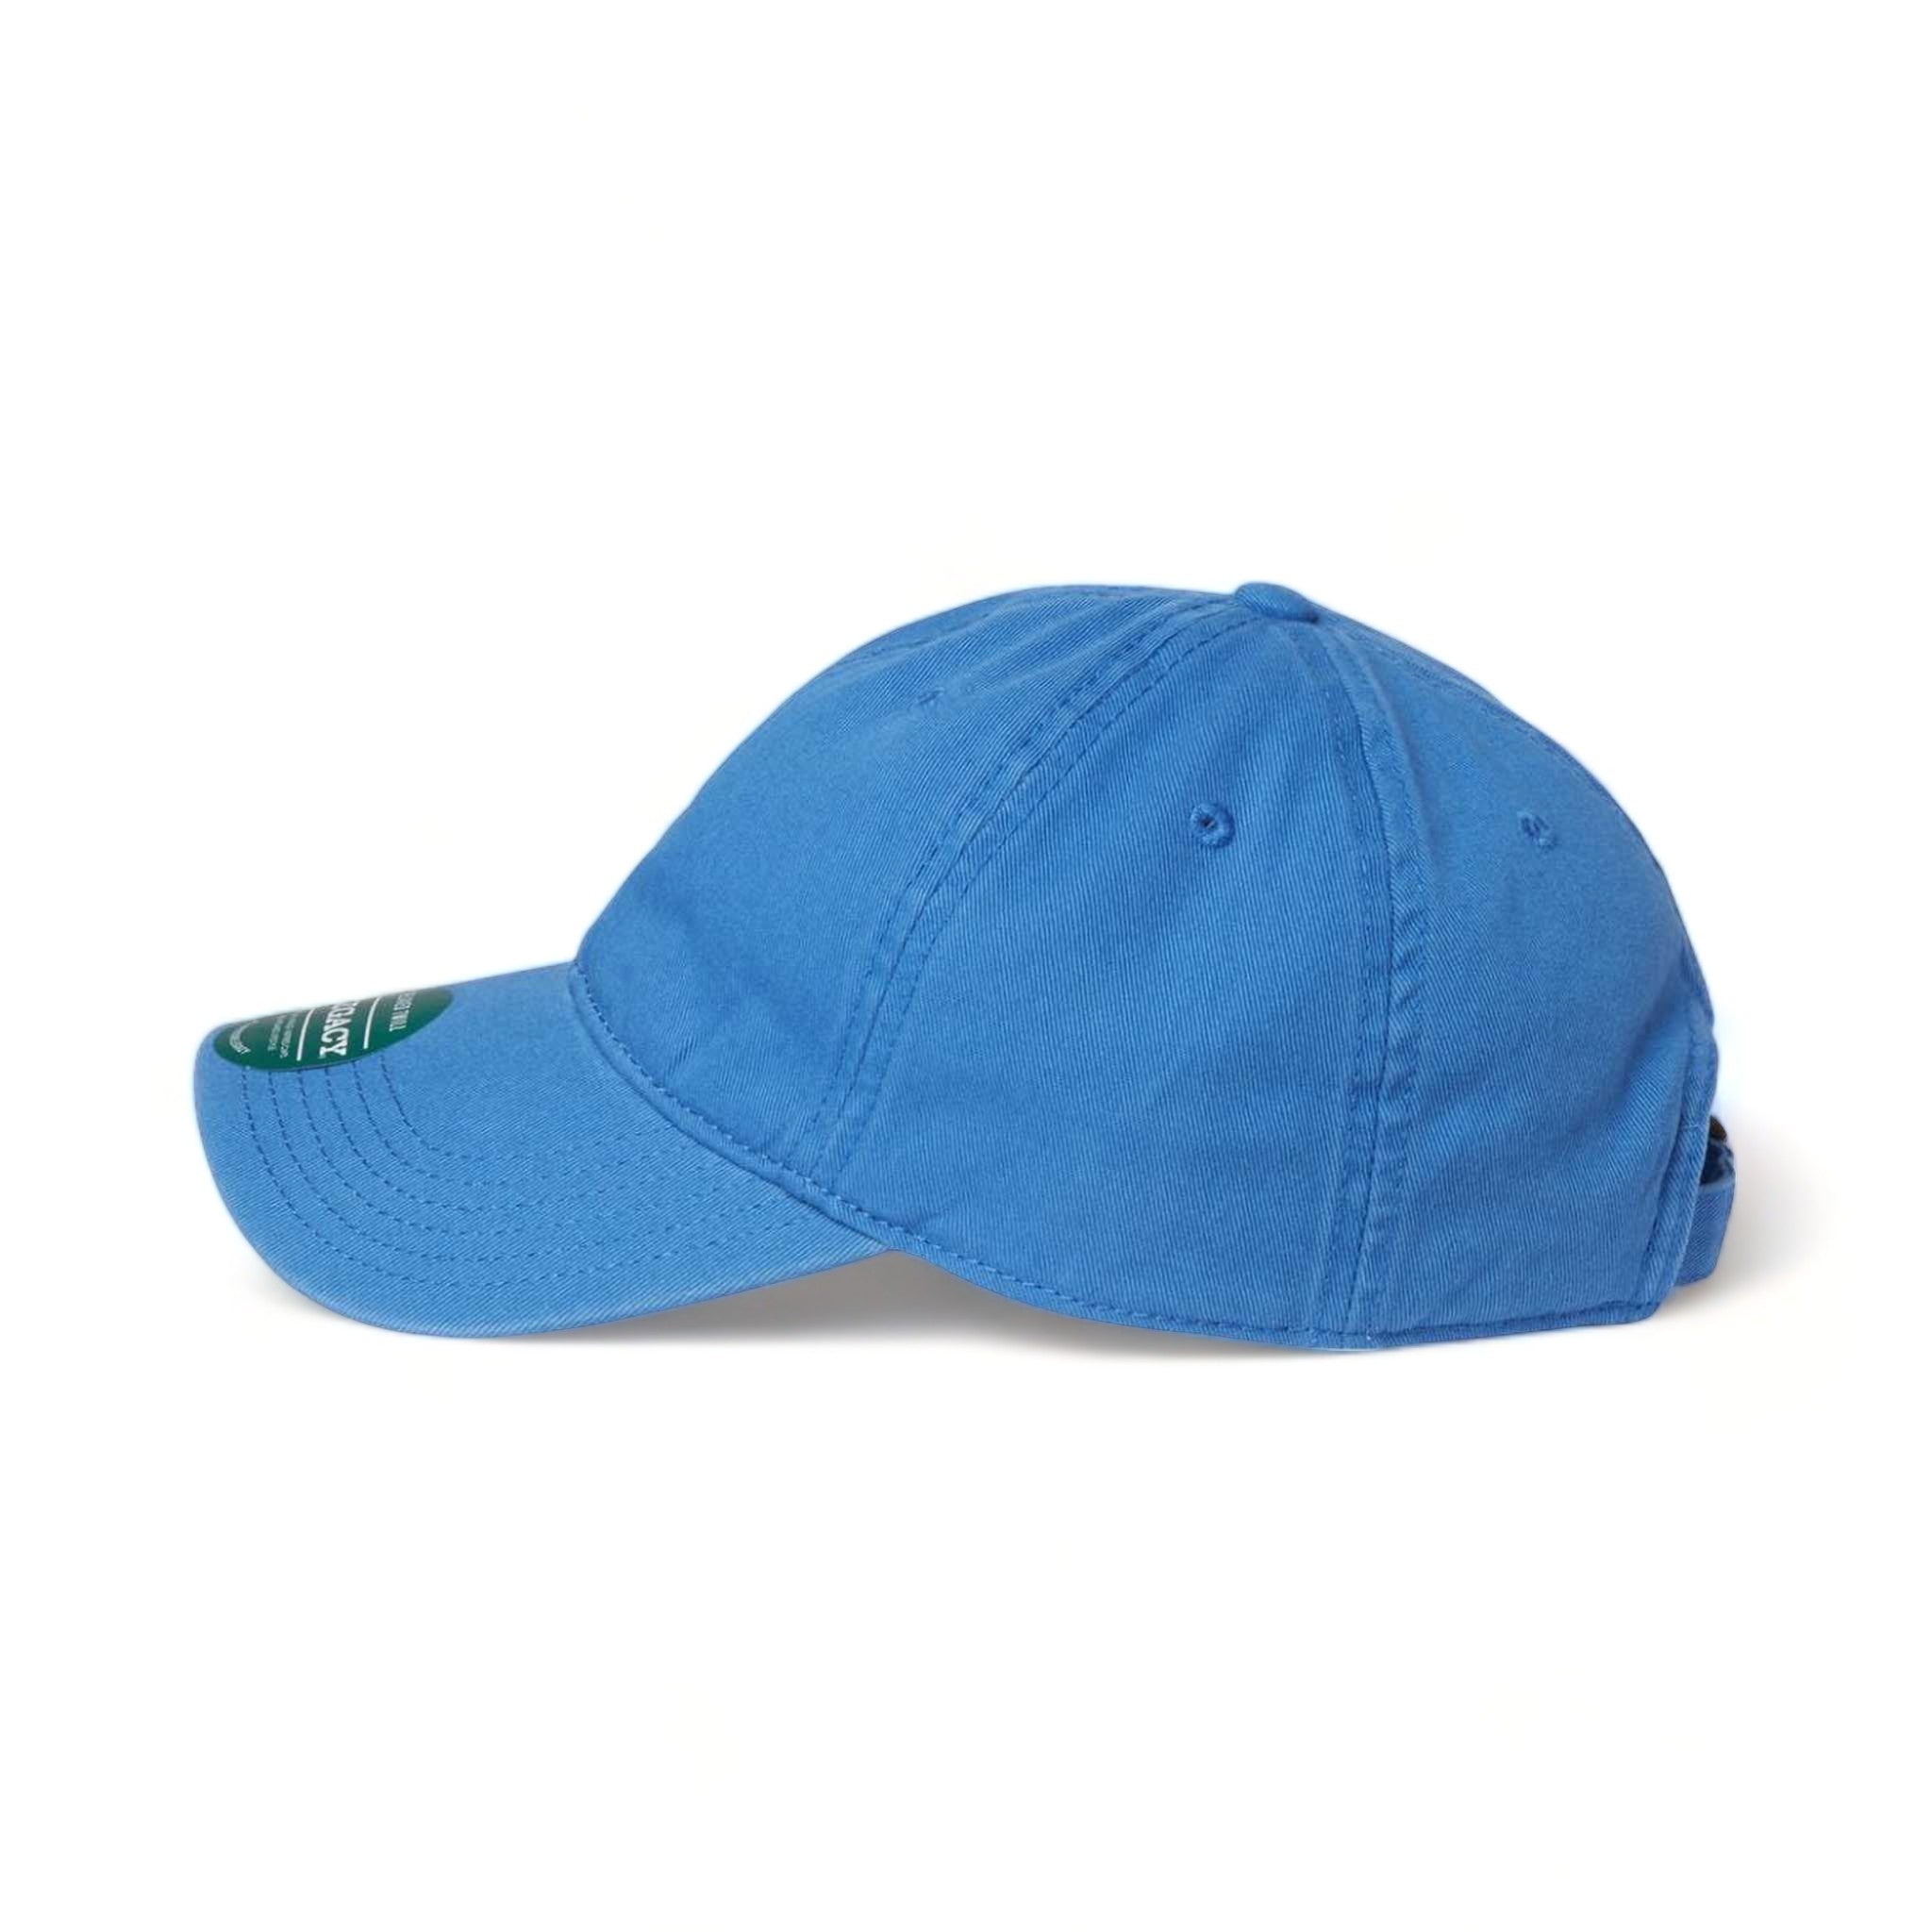 Side view of LEGACY EZA custom hat in pacific blue